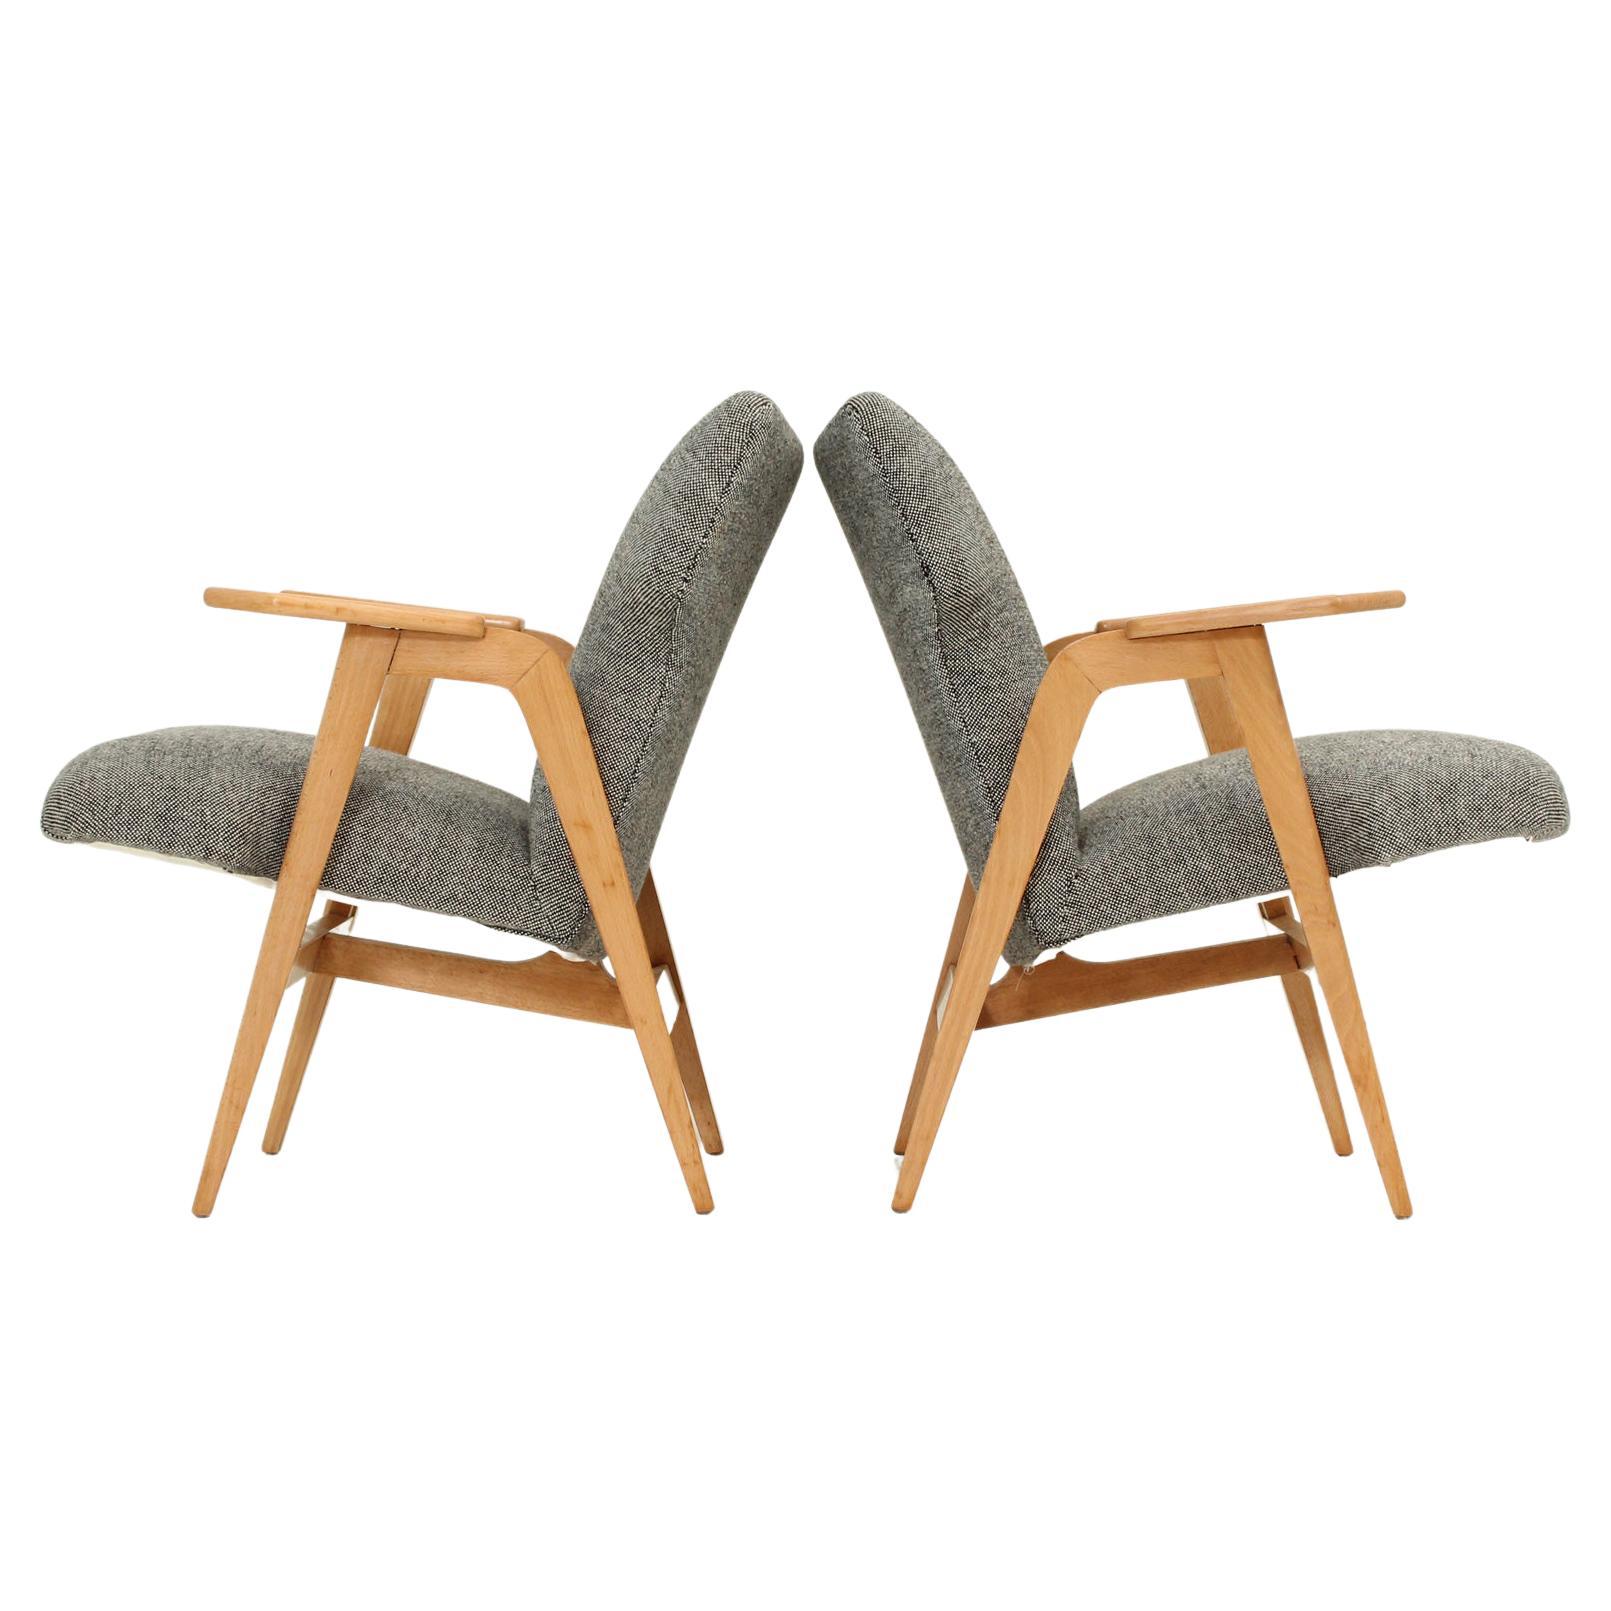 Roger Landault pair of Armchairs, France, 1950's